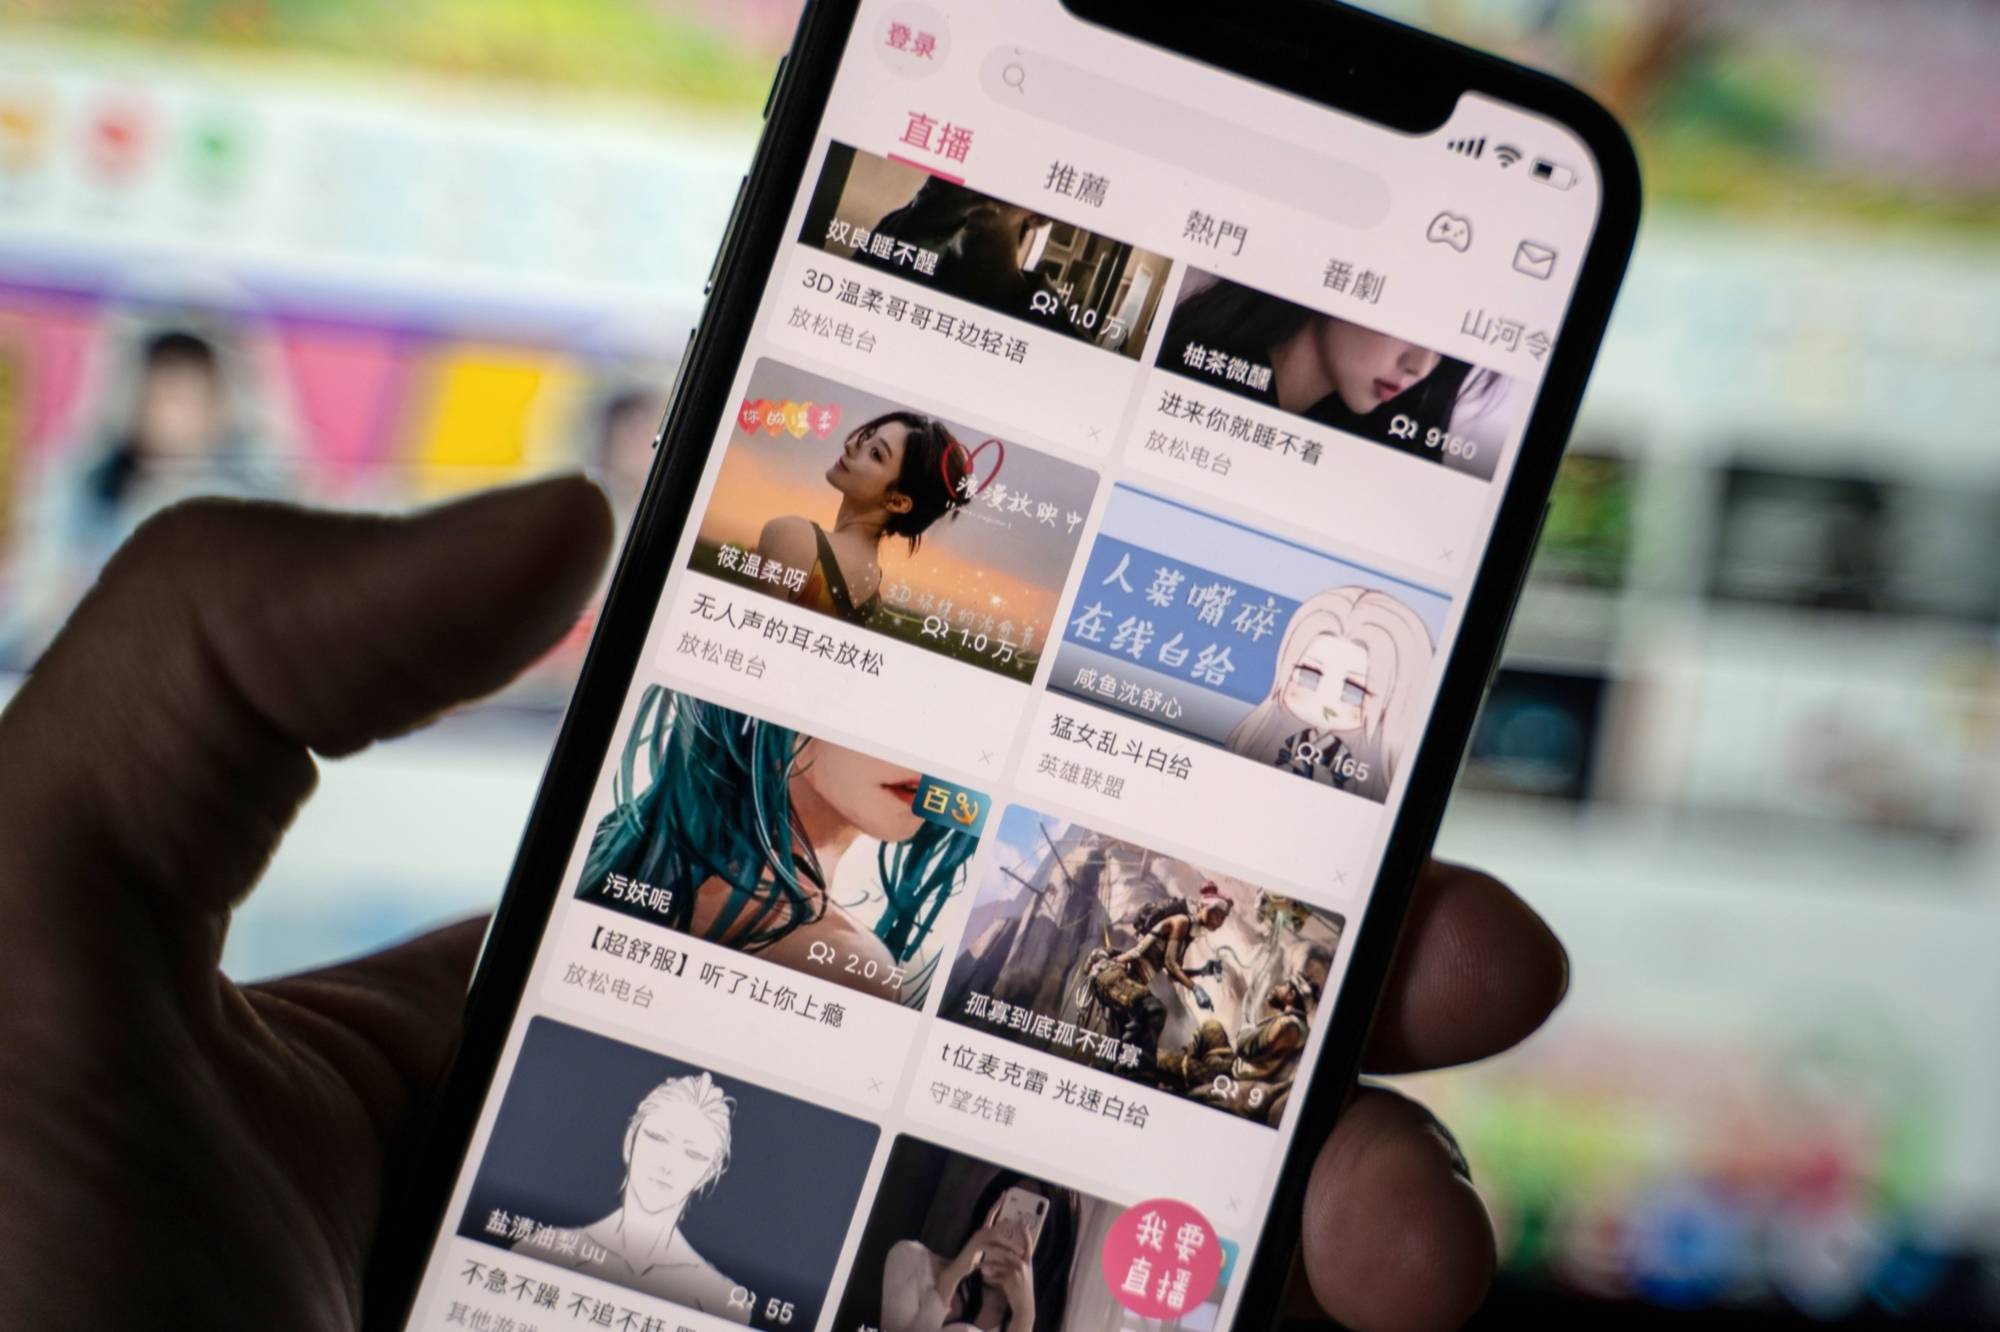 Fall Guys' Going Mobile In China Thanks To Bilibili